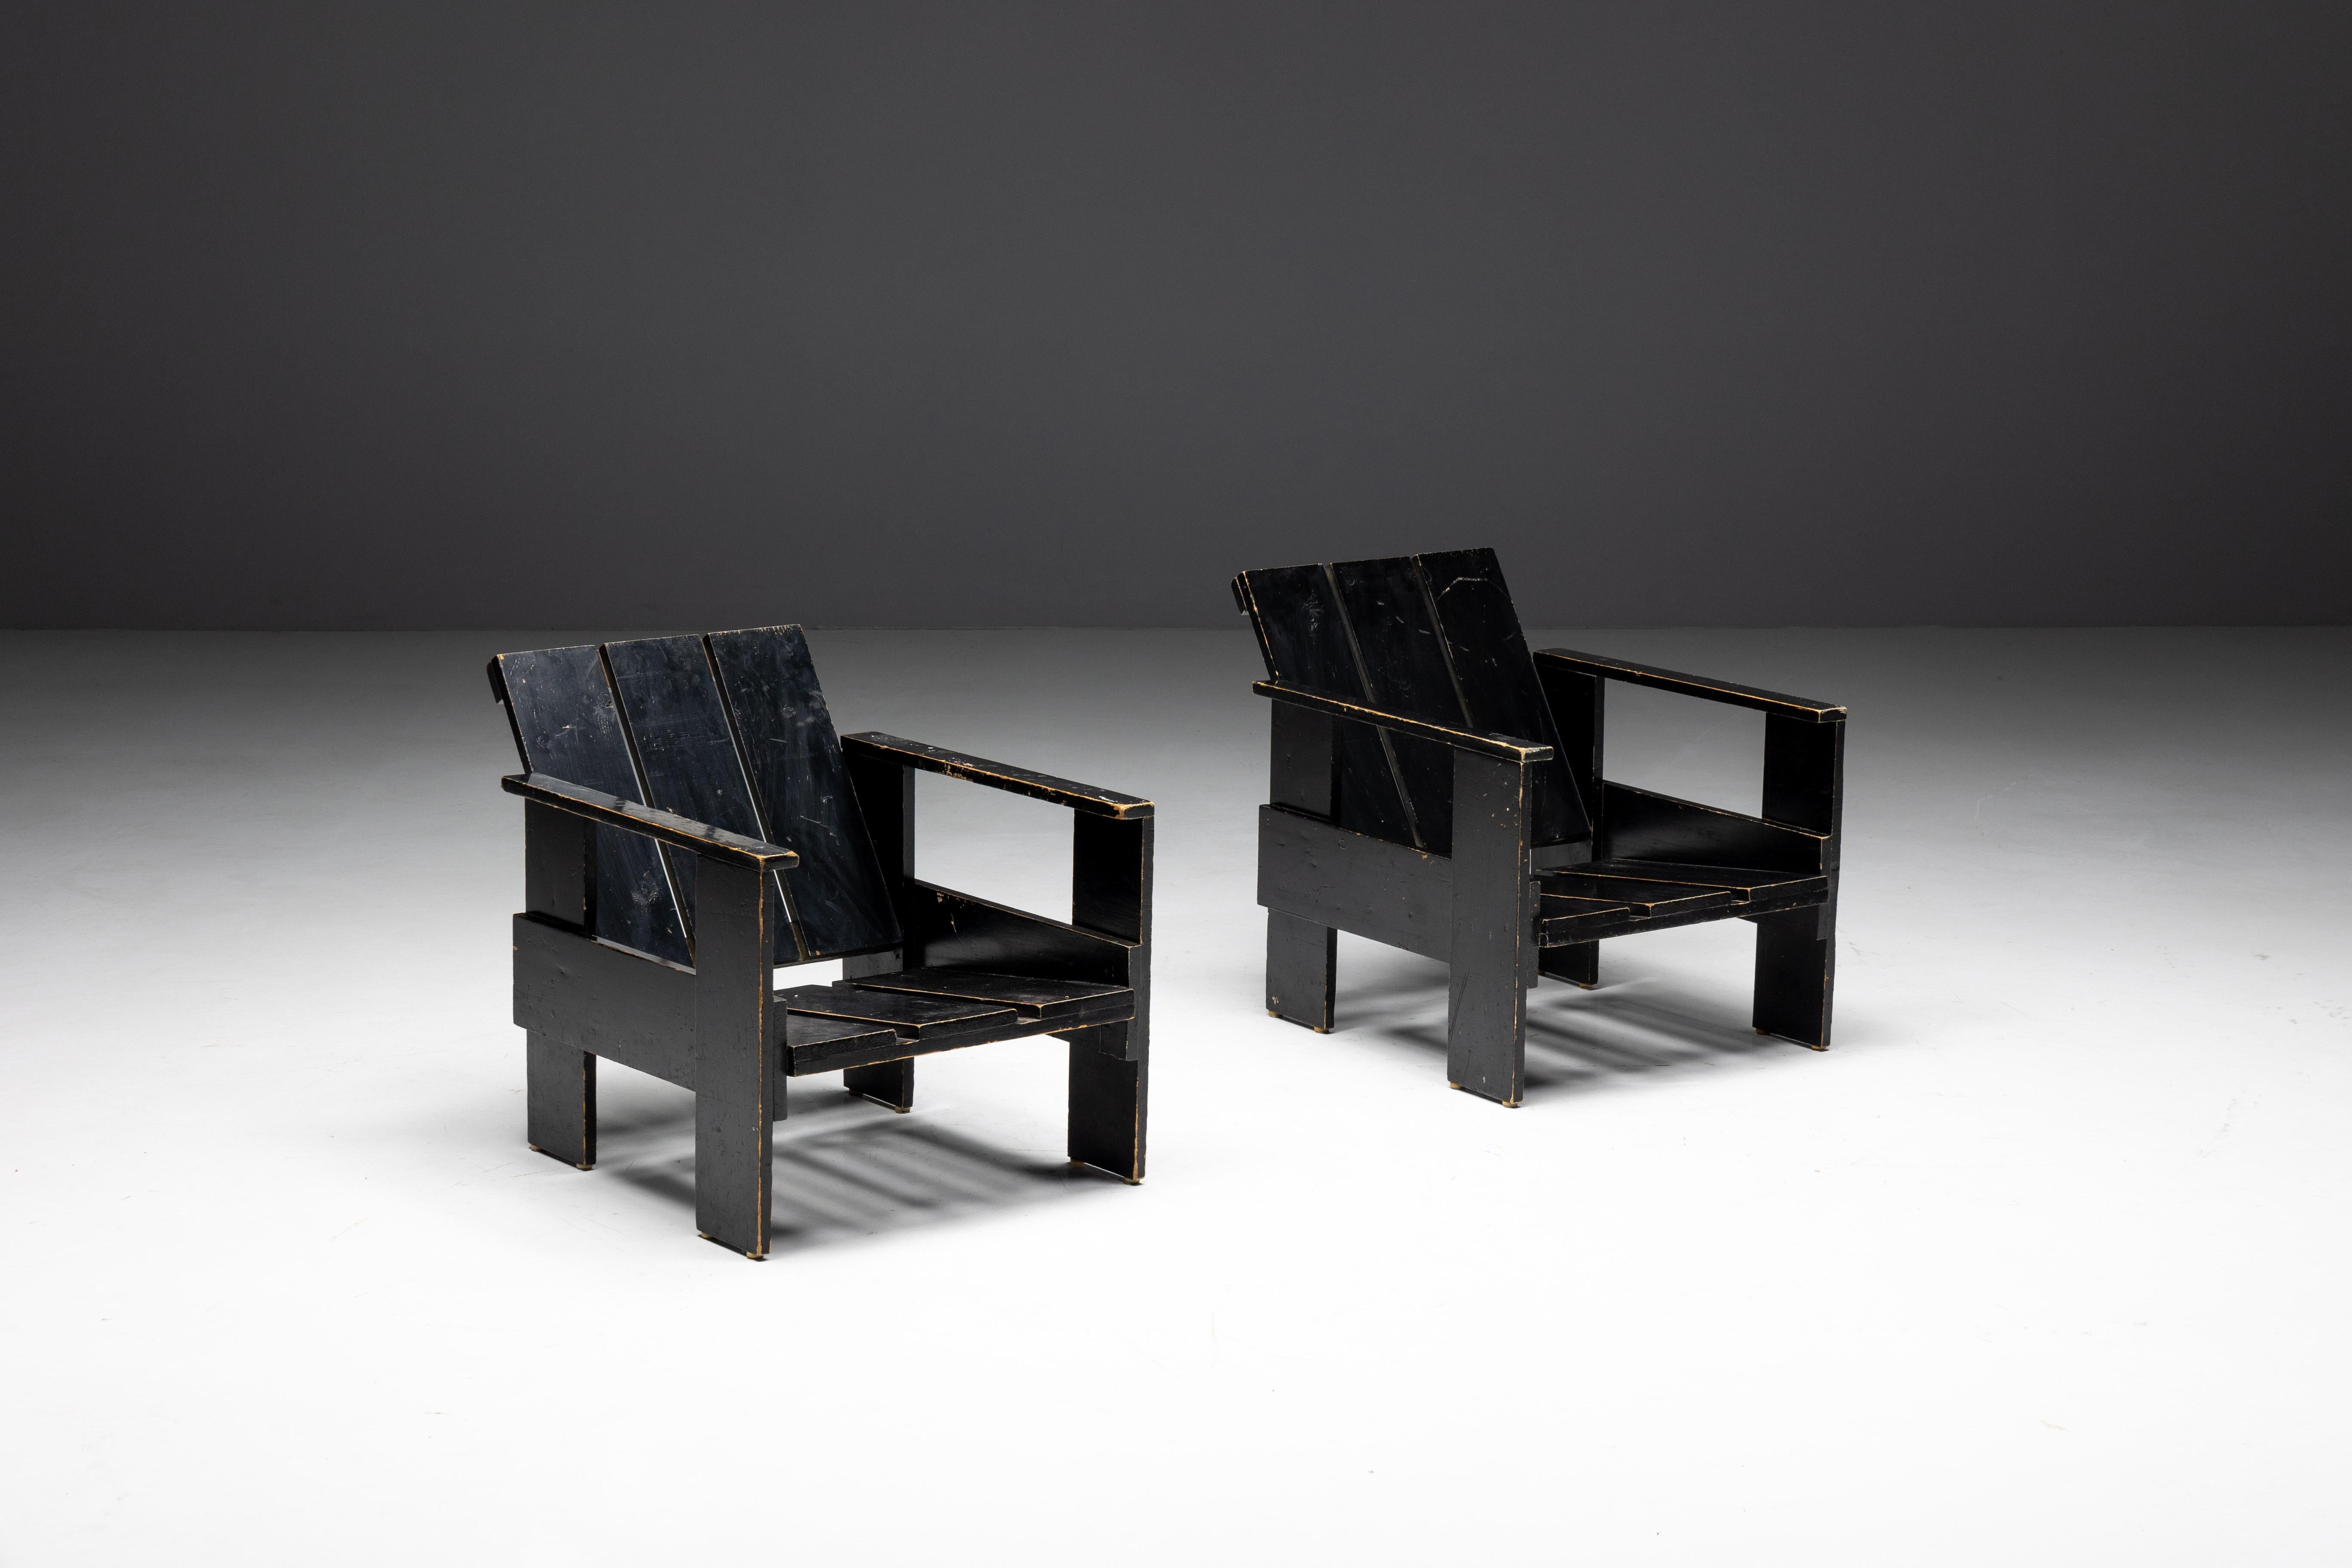 Crate Chairs by Gerrit Rietveld, Netherlands, 1940s For Sale 1